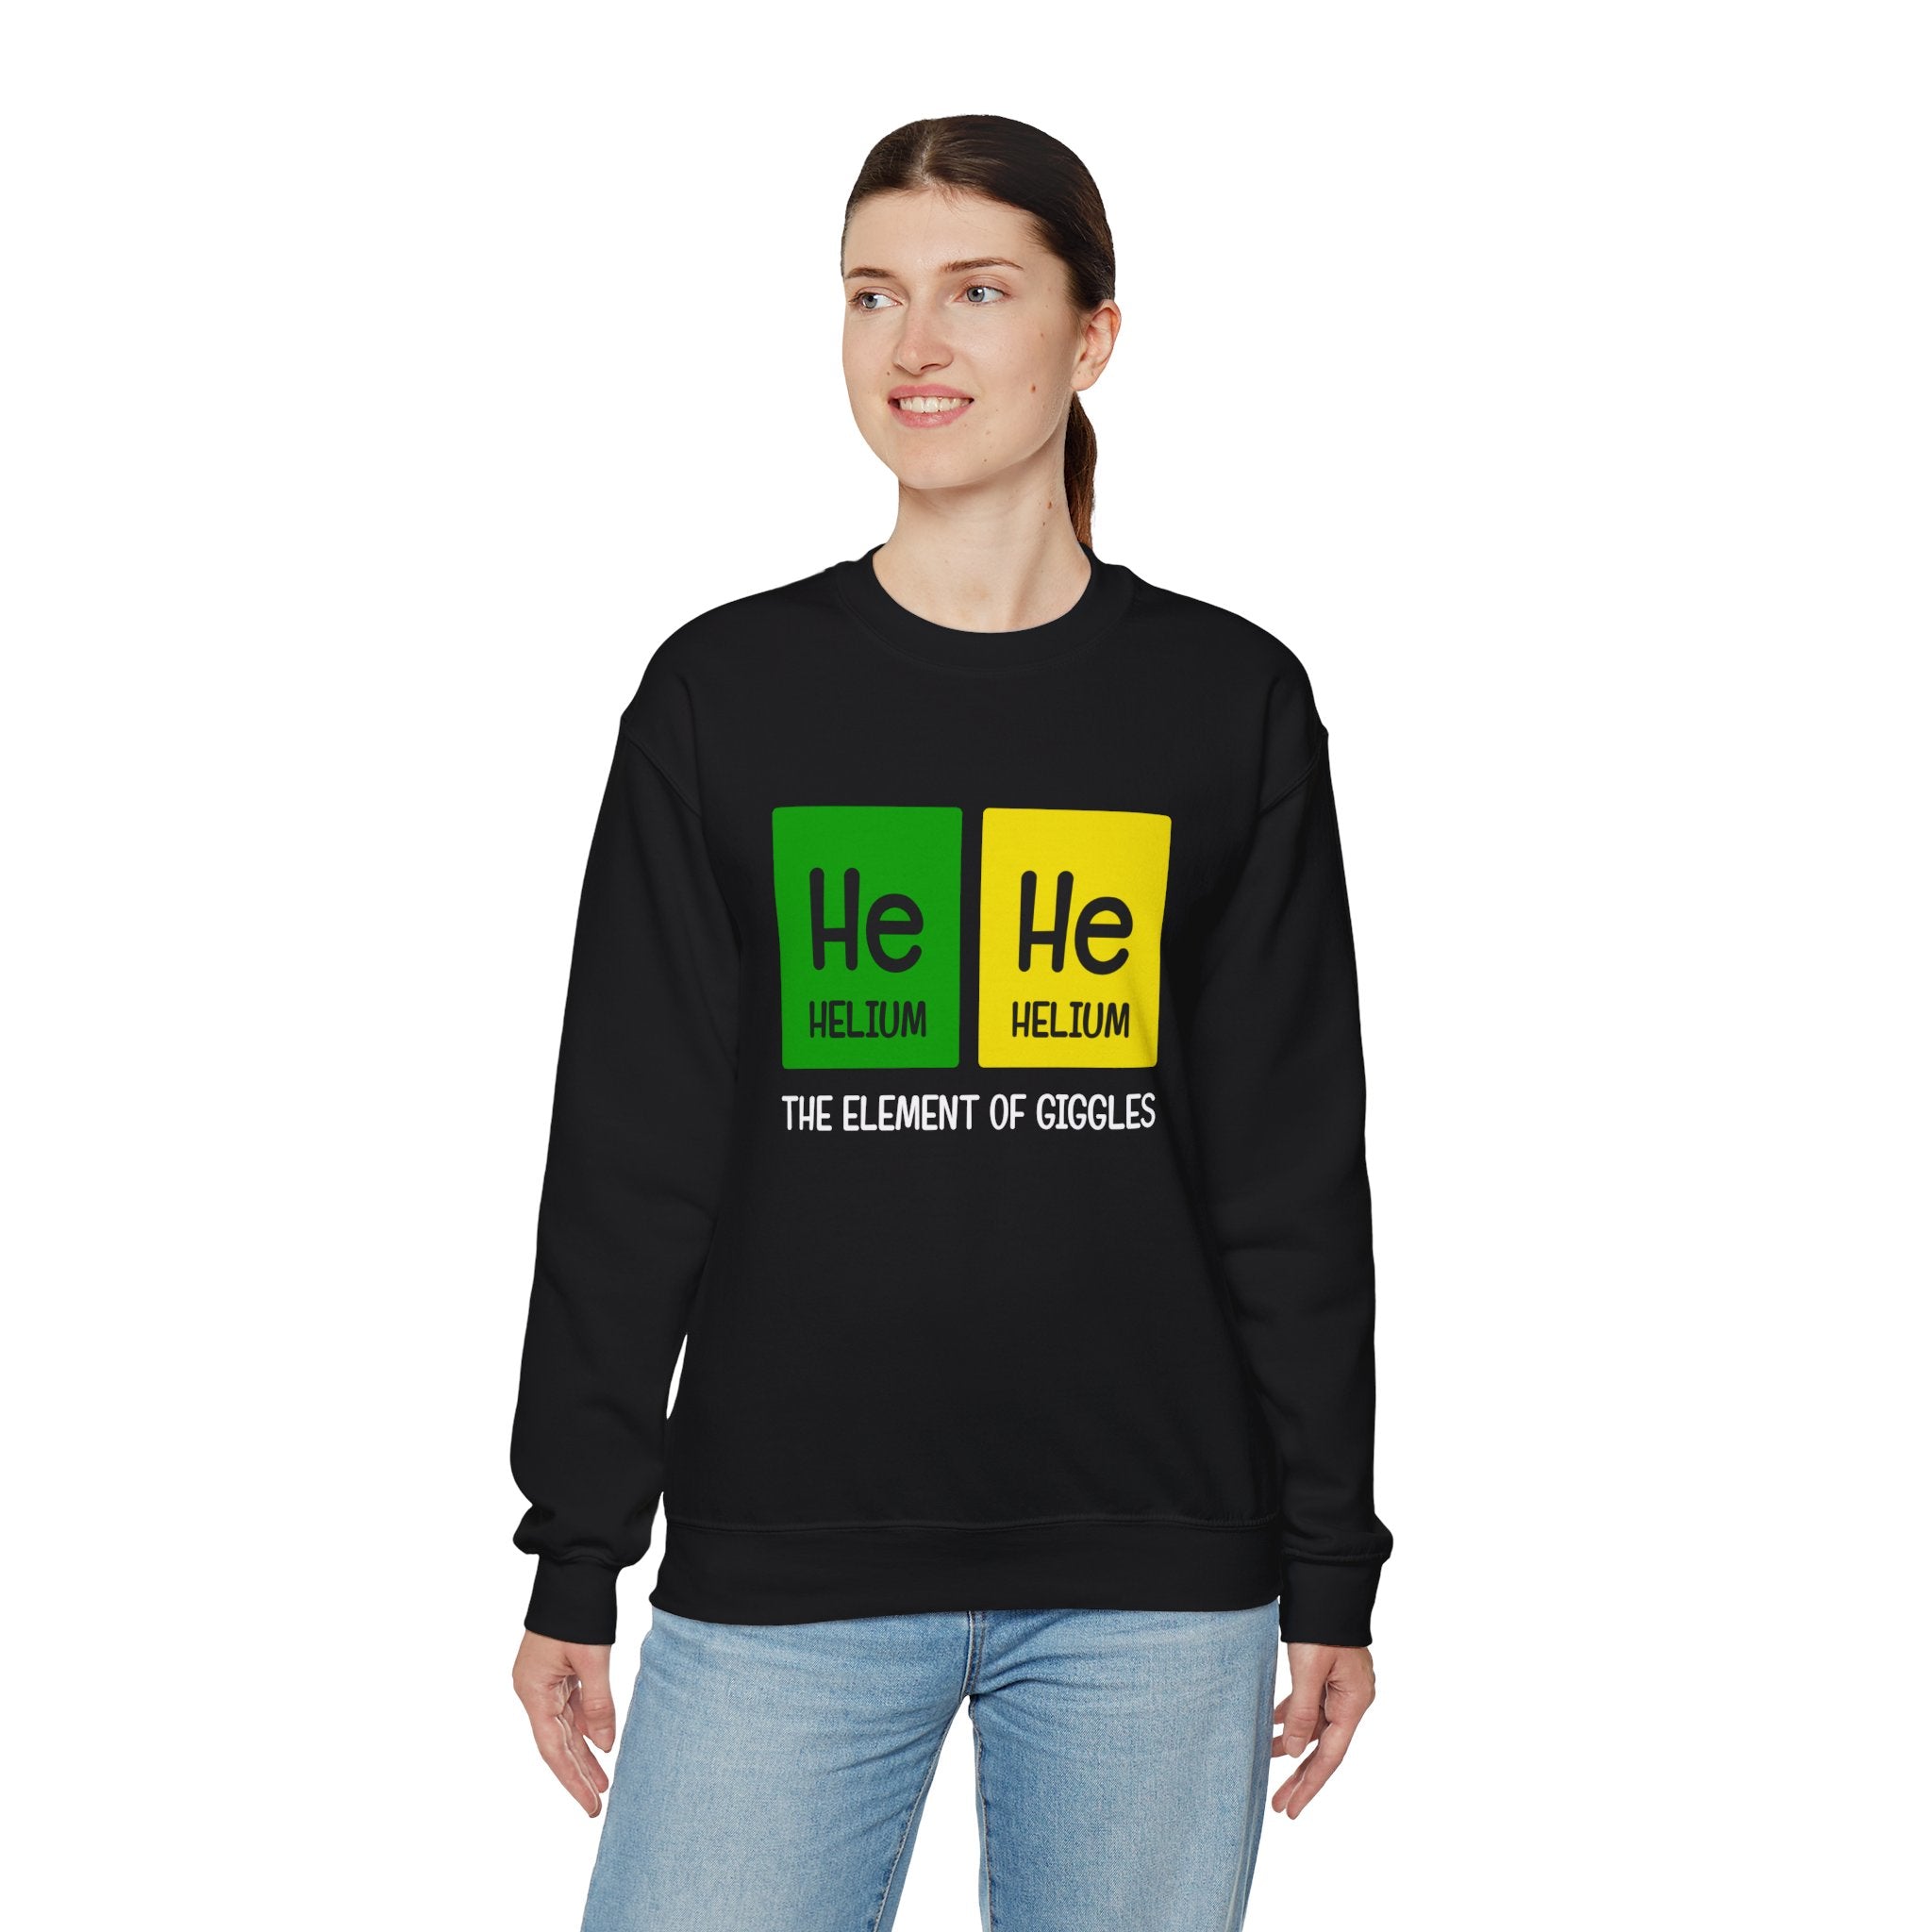 A person in jeans wears a stylish black He-He - Sweatshirt featuring a periodic table design with “He” highlighted in green and yellow, and text below reading “The Element of Giggles.” The coziness of the sweatshirt adds an extra layer of charm to the outfit.